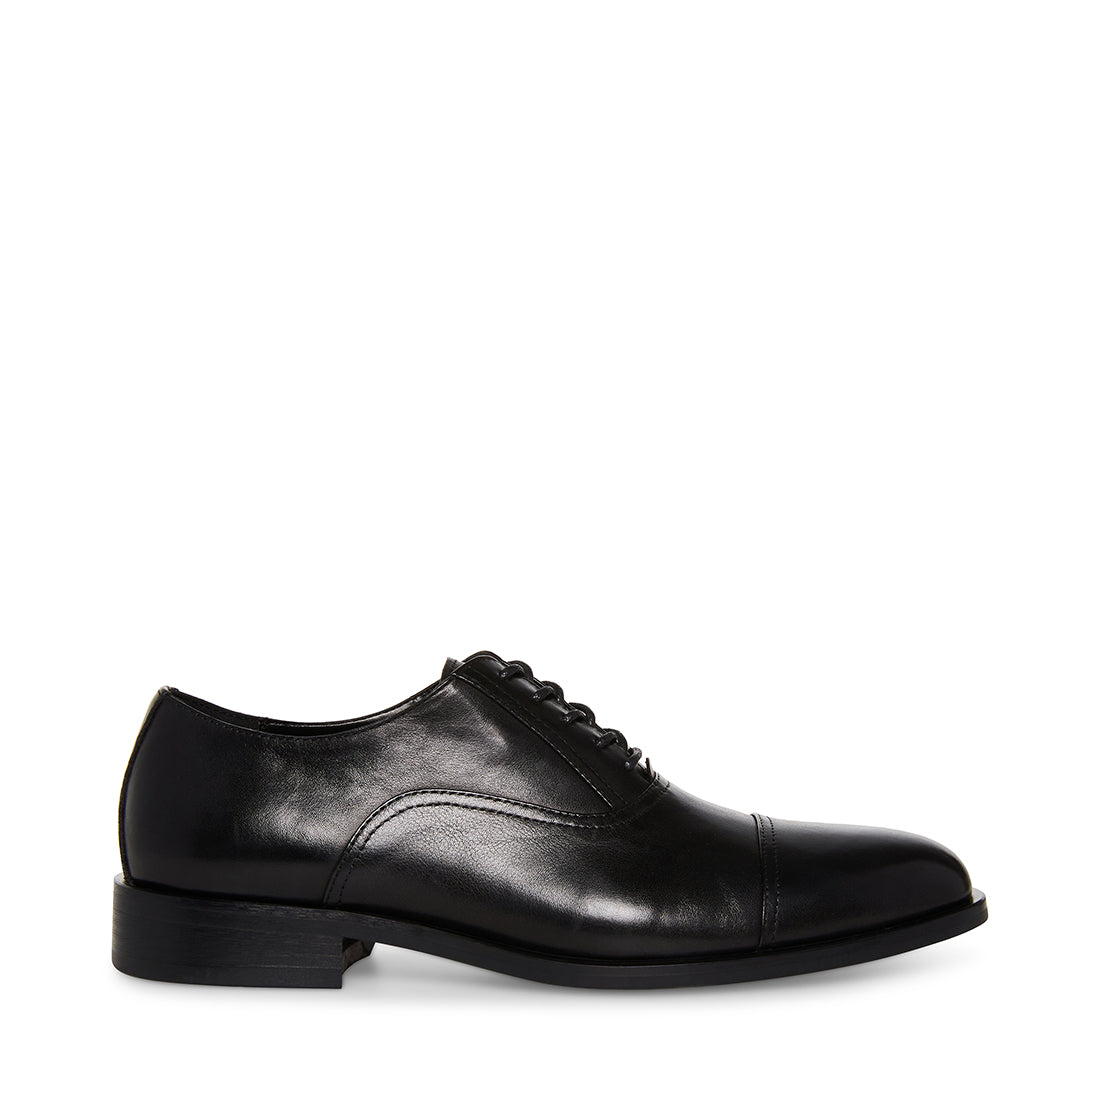 Formal Shoes for men at low prices